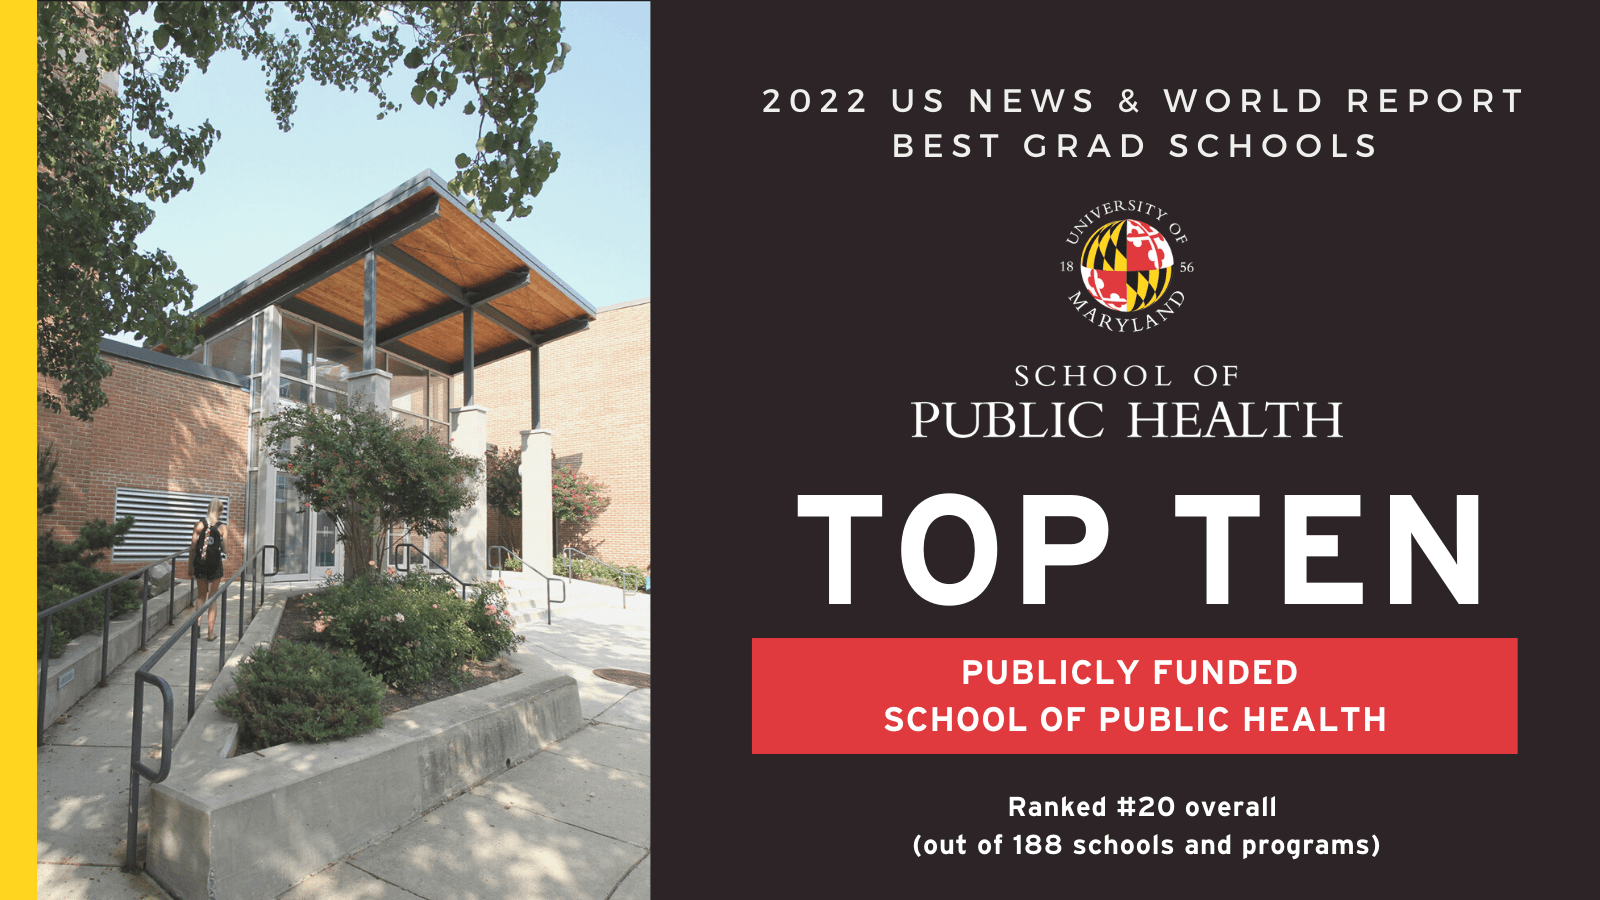 2022 US News and World Report Best Grad Schools. University of Maryland School of Public Health Top Ten Publicly Funded School of Public Health. Ranked #20 overall (out of 188 schools and programs)